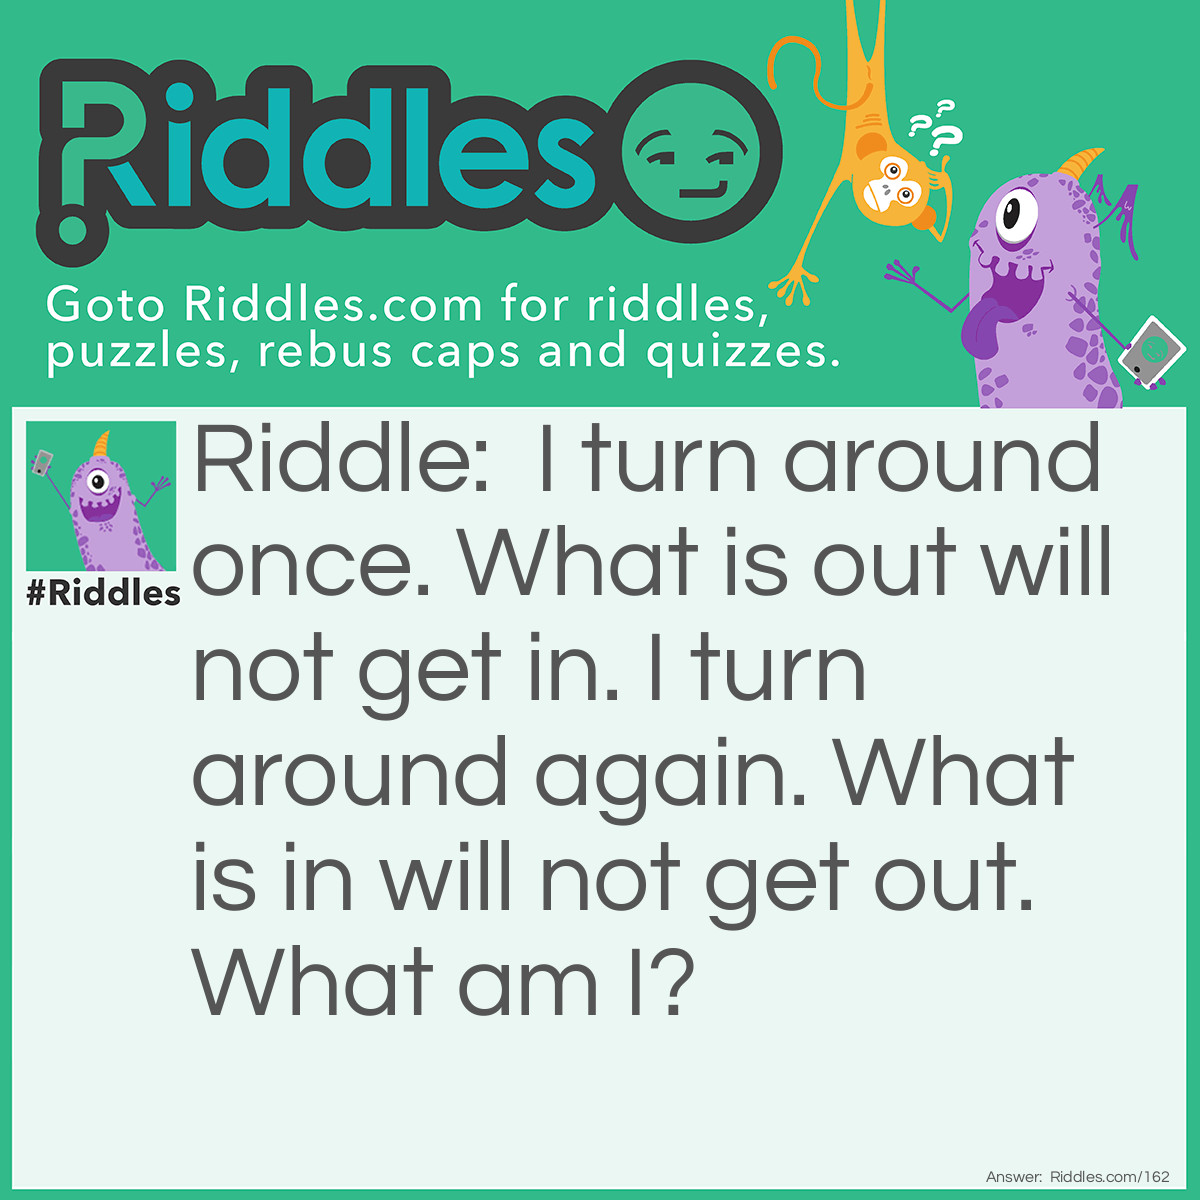 Riddle: I turn around once. What is out will not get in. I turn around again. What is in will not get out. What am I? Answer: A Key.